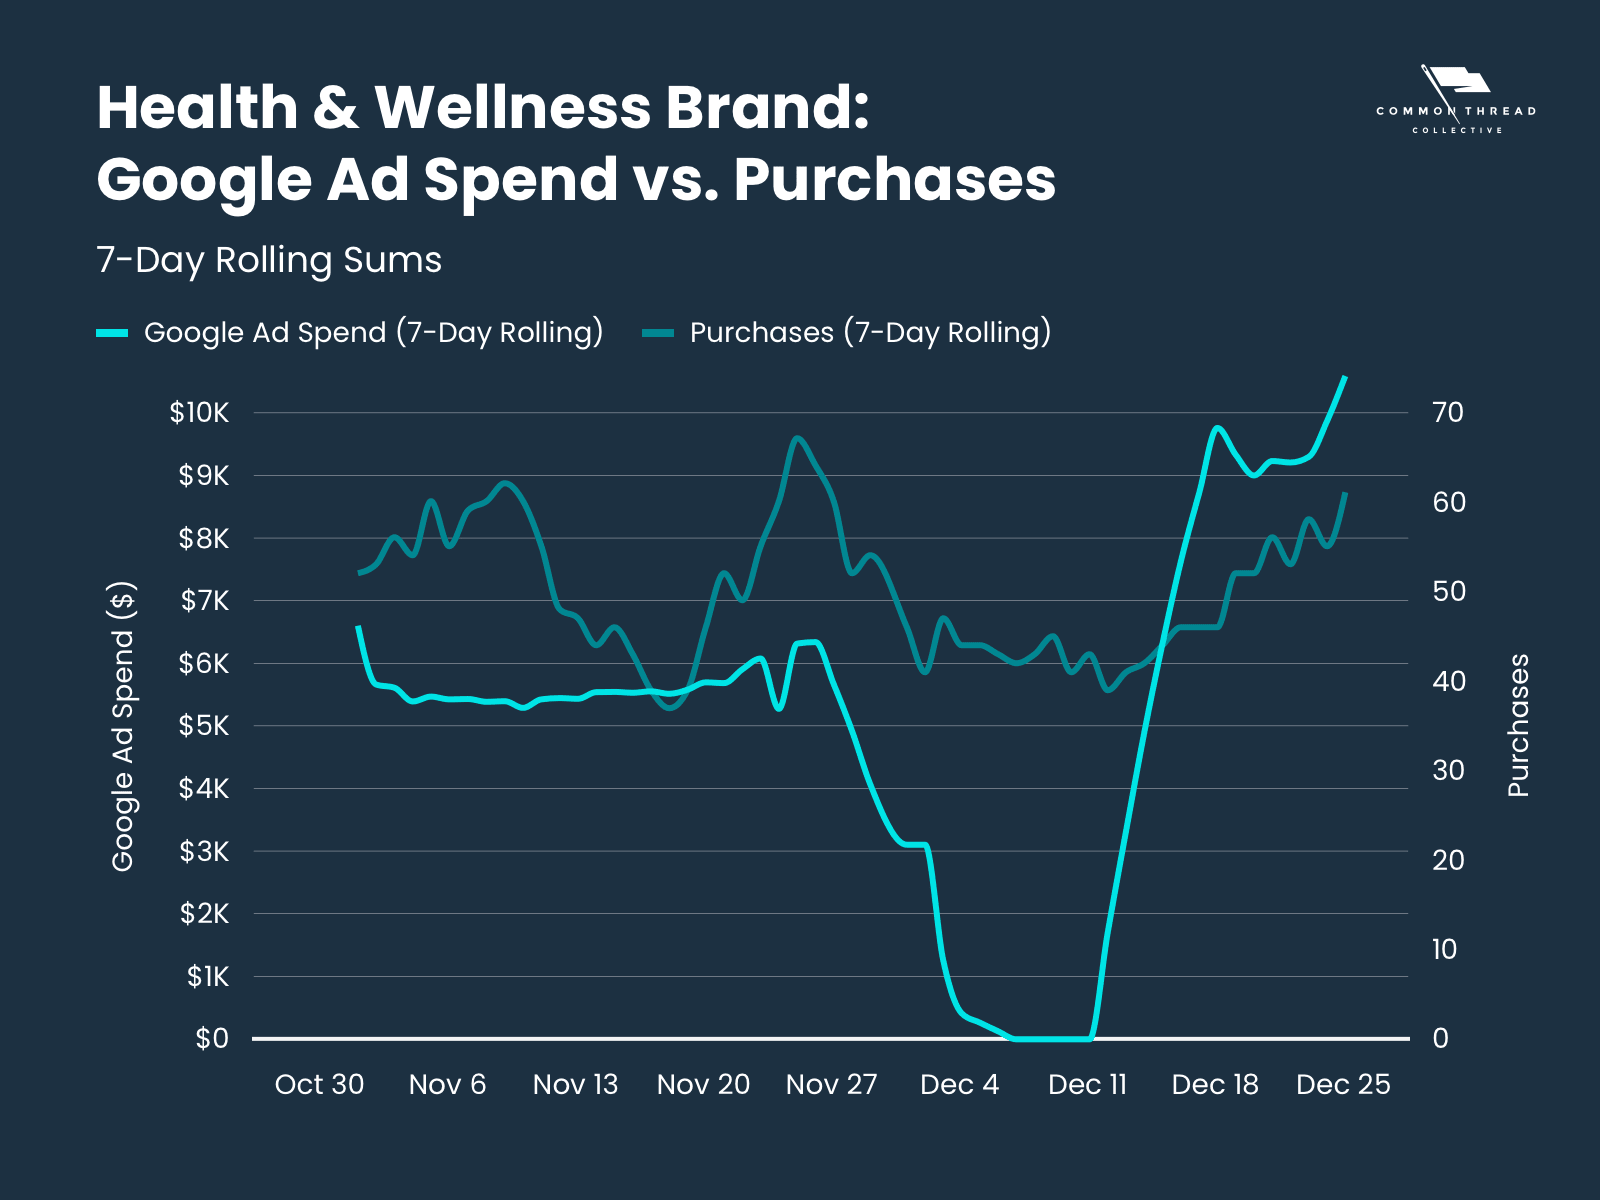 Health and Wellness: Google Ad Spend vs. Purchases